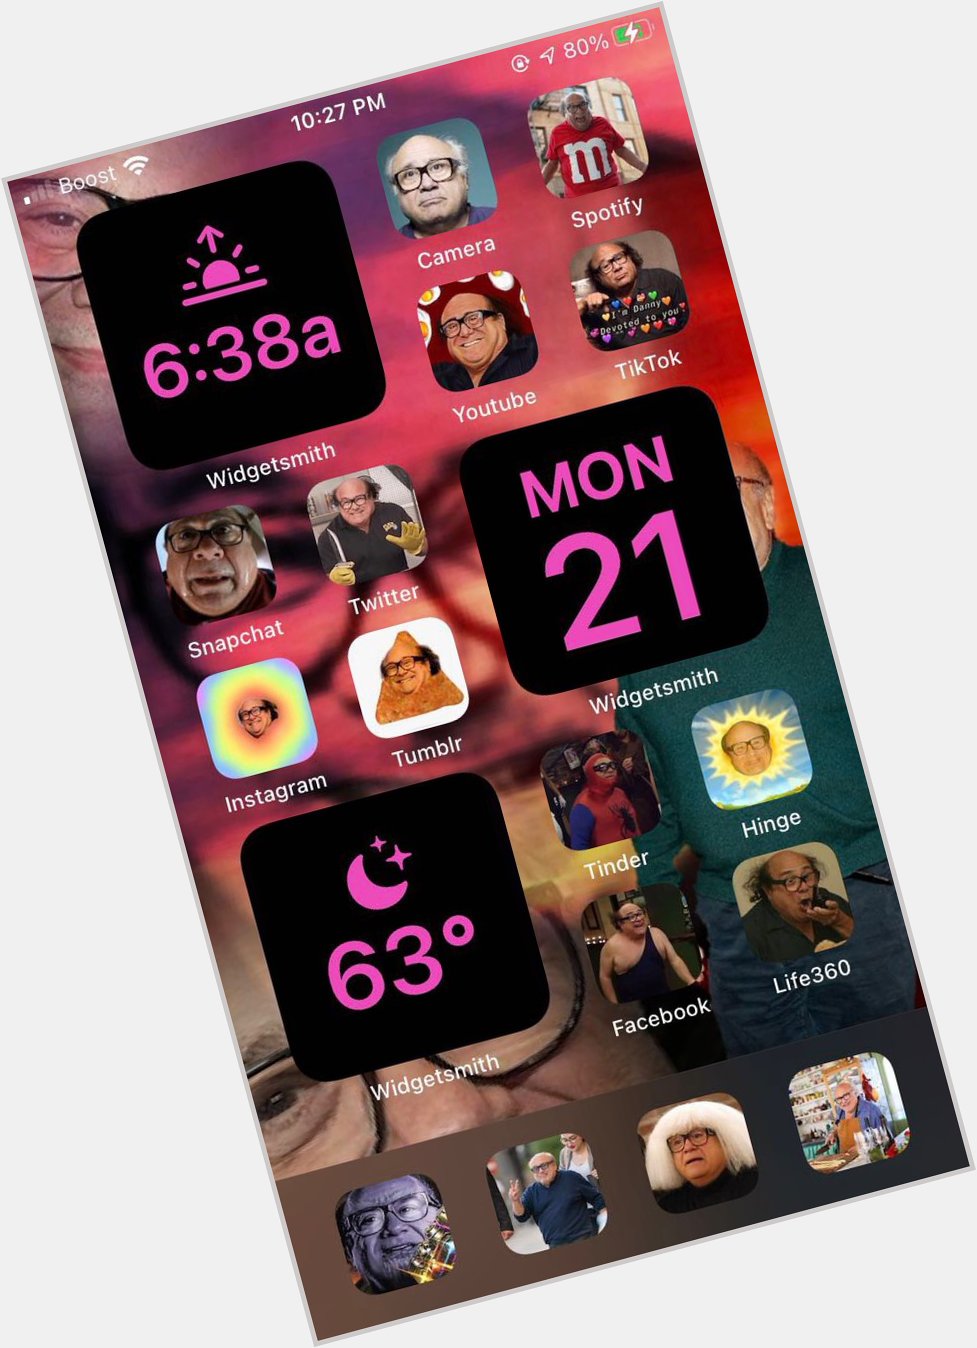 Happy birthday danny devito

i will never be able to top this theme for my phone 